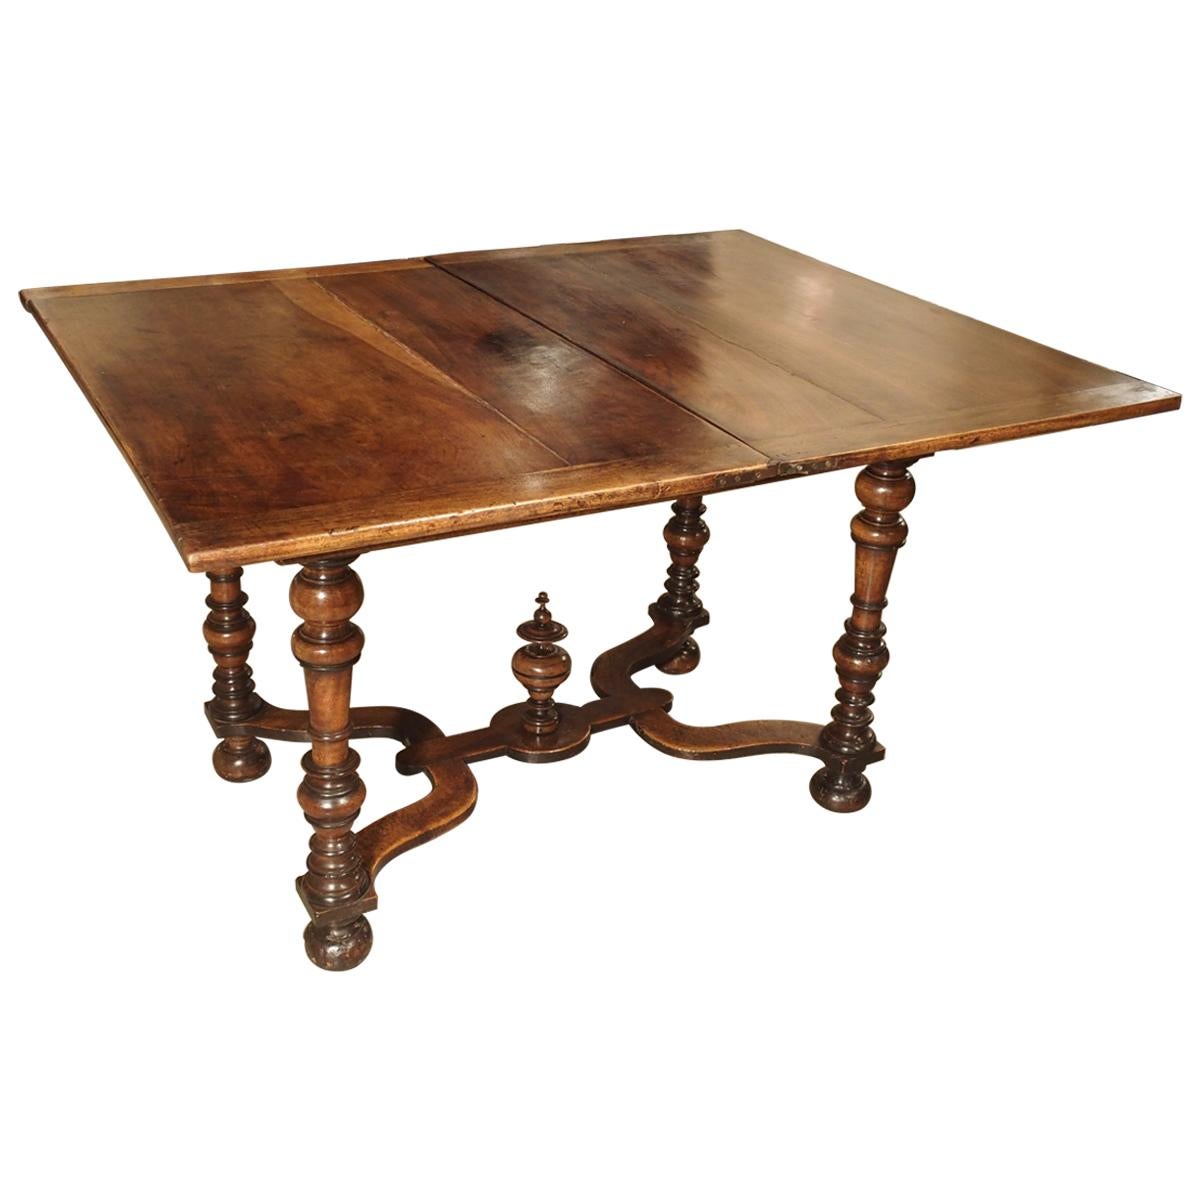 This fascinating French table dates to the early to mid-1600s. It is constructed from walnut and patinated walnut, and has a swivel top that folds open to about 51 x 42 inches. This type of table is referred to as a “table portefeuille”. A plateau